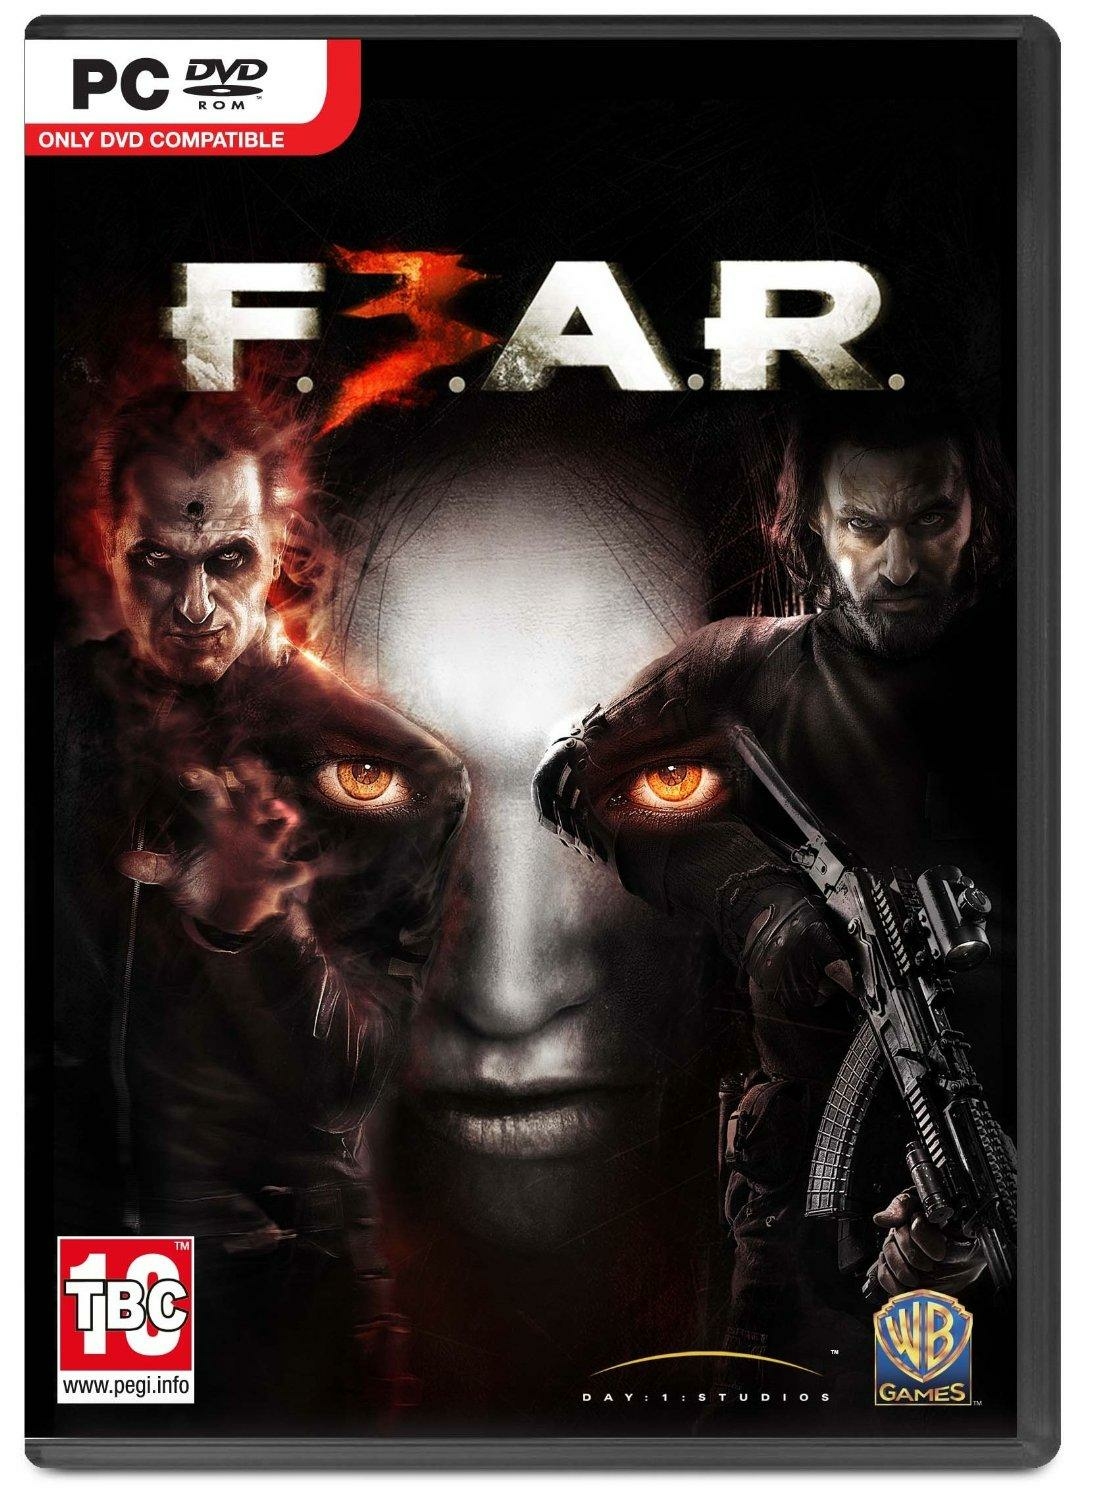 fear 3 gameplay pc